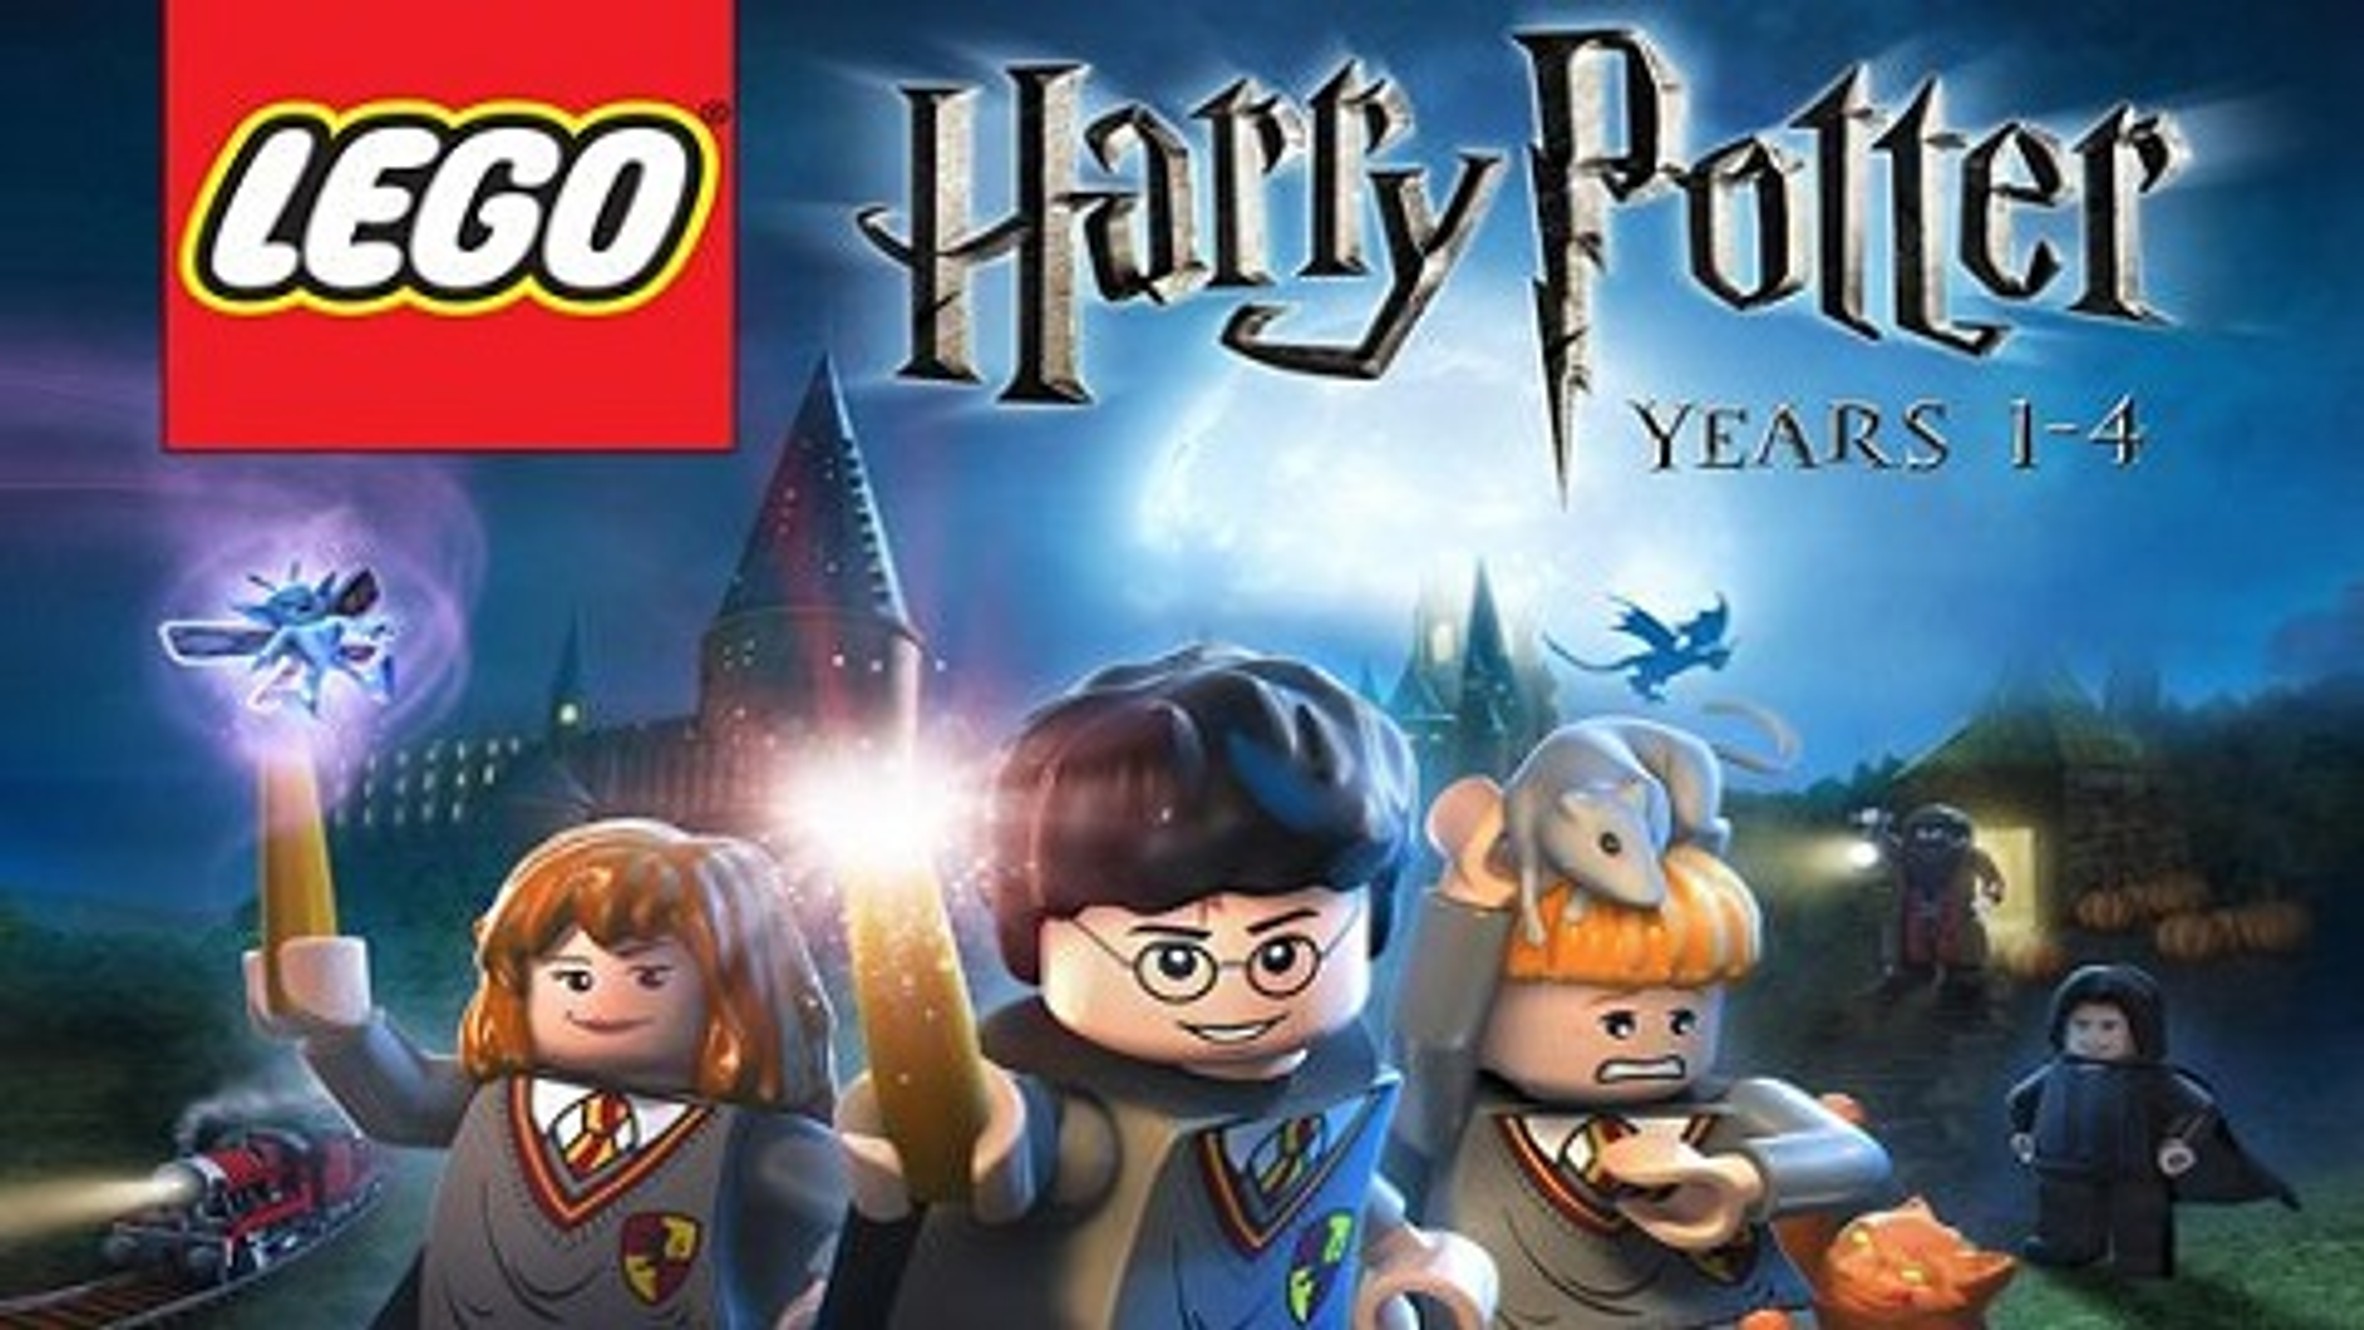 lego-harry-potter-years-1-4-free-download-latest-version-gaming-news-analyst